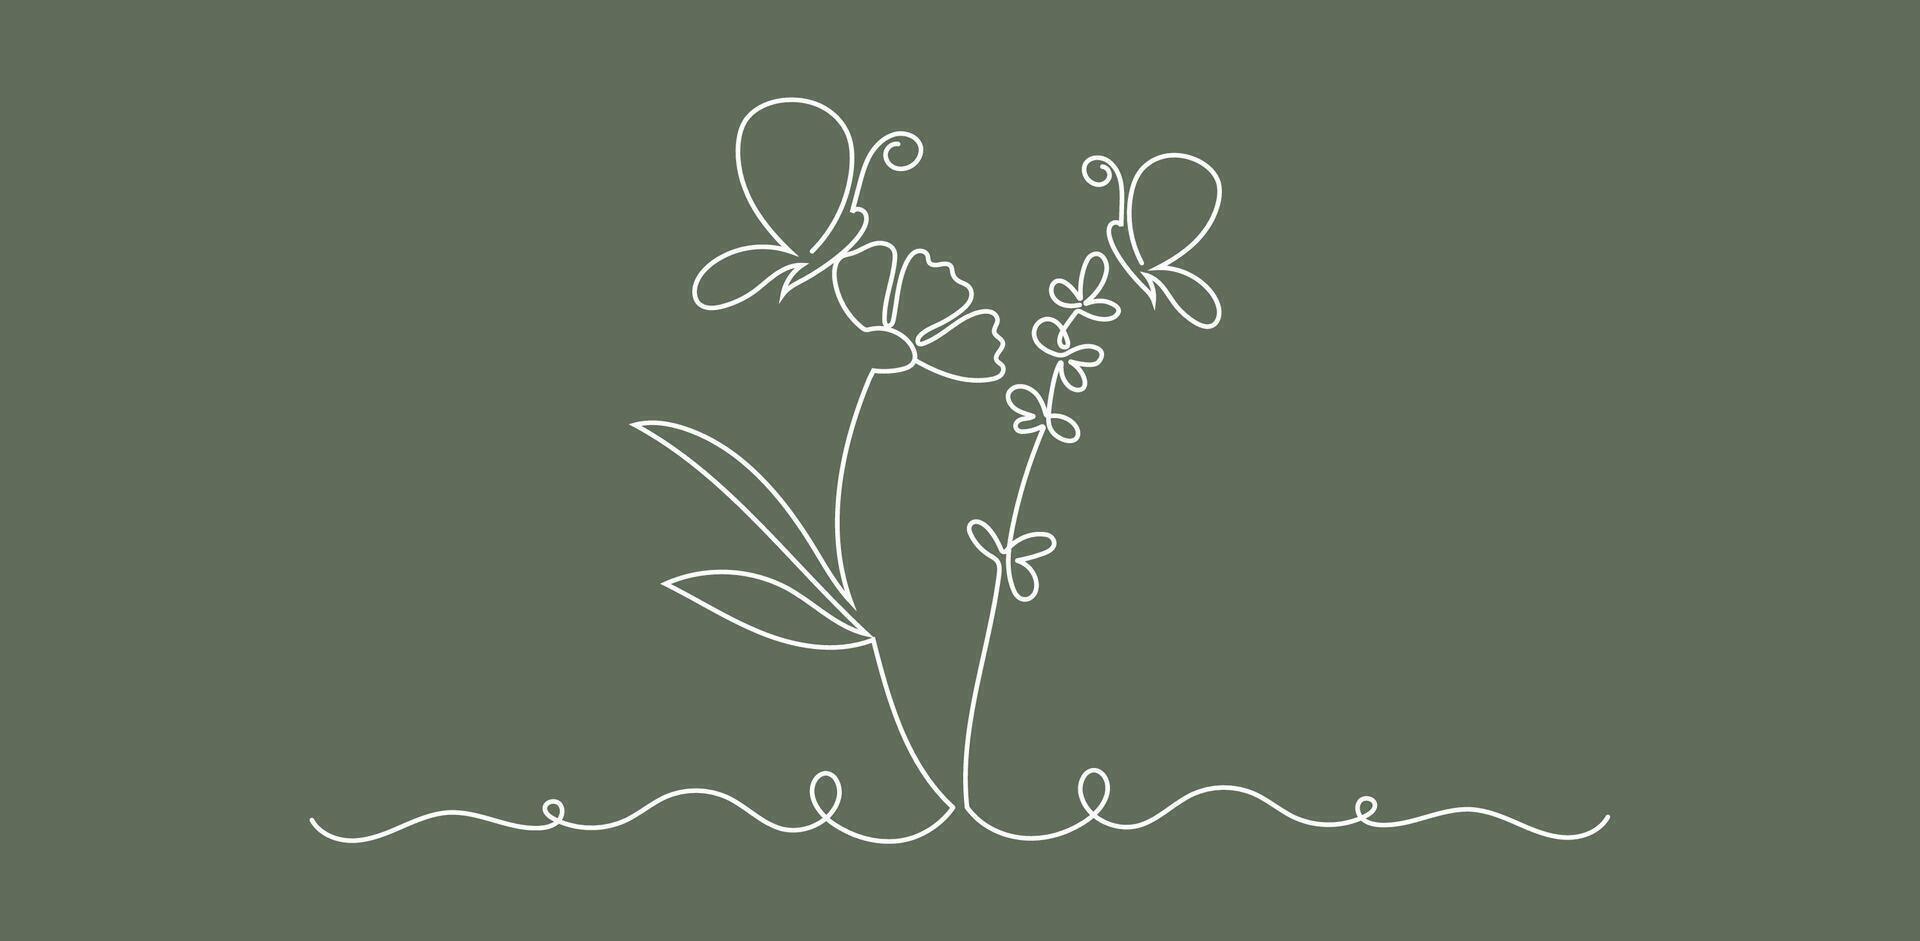 Handdrawn border with flowers and butterflies. Vector line art illustration.